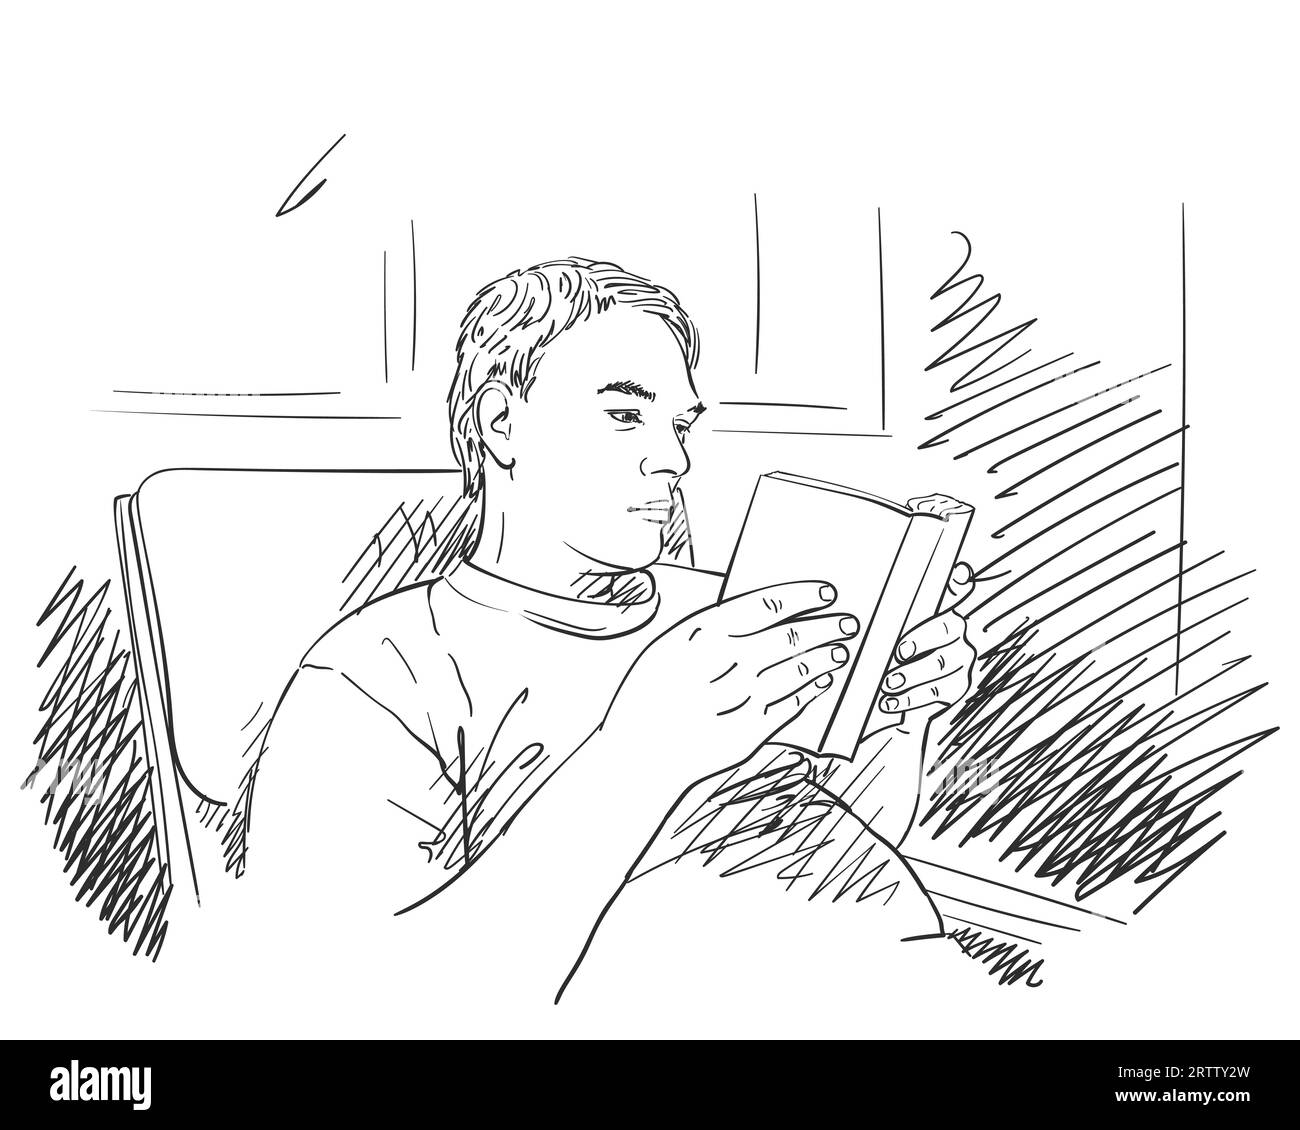 Sketch of man reading book, Hand drawn vector illustration with hatched shades Stock Vector